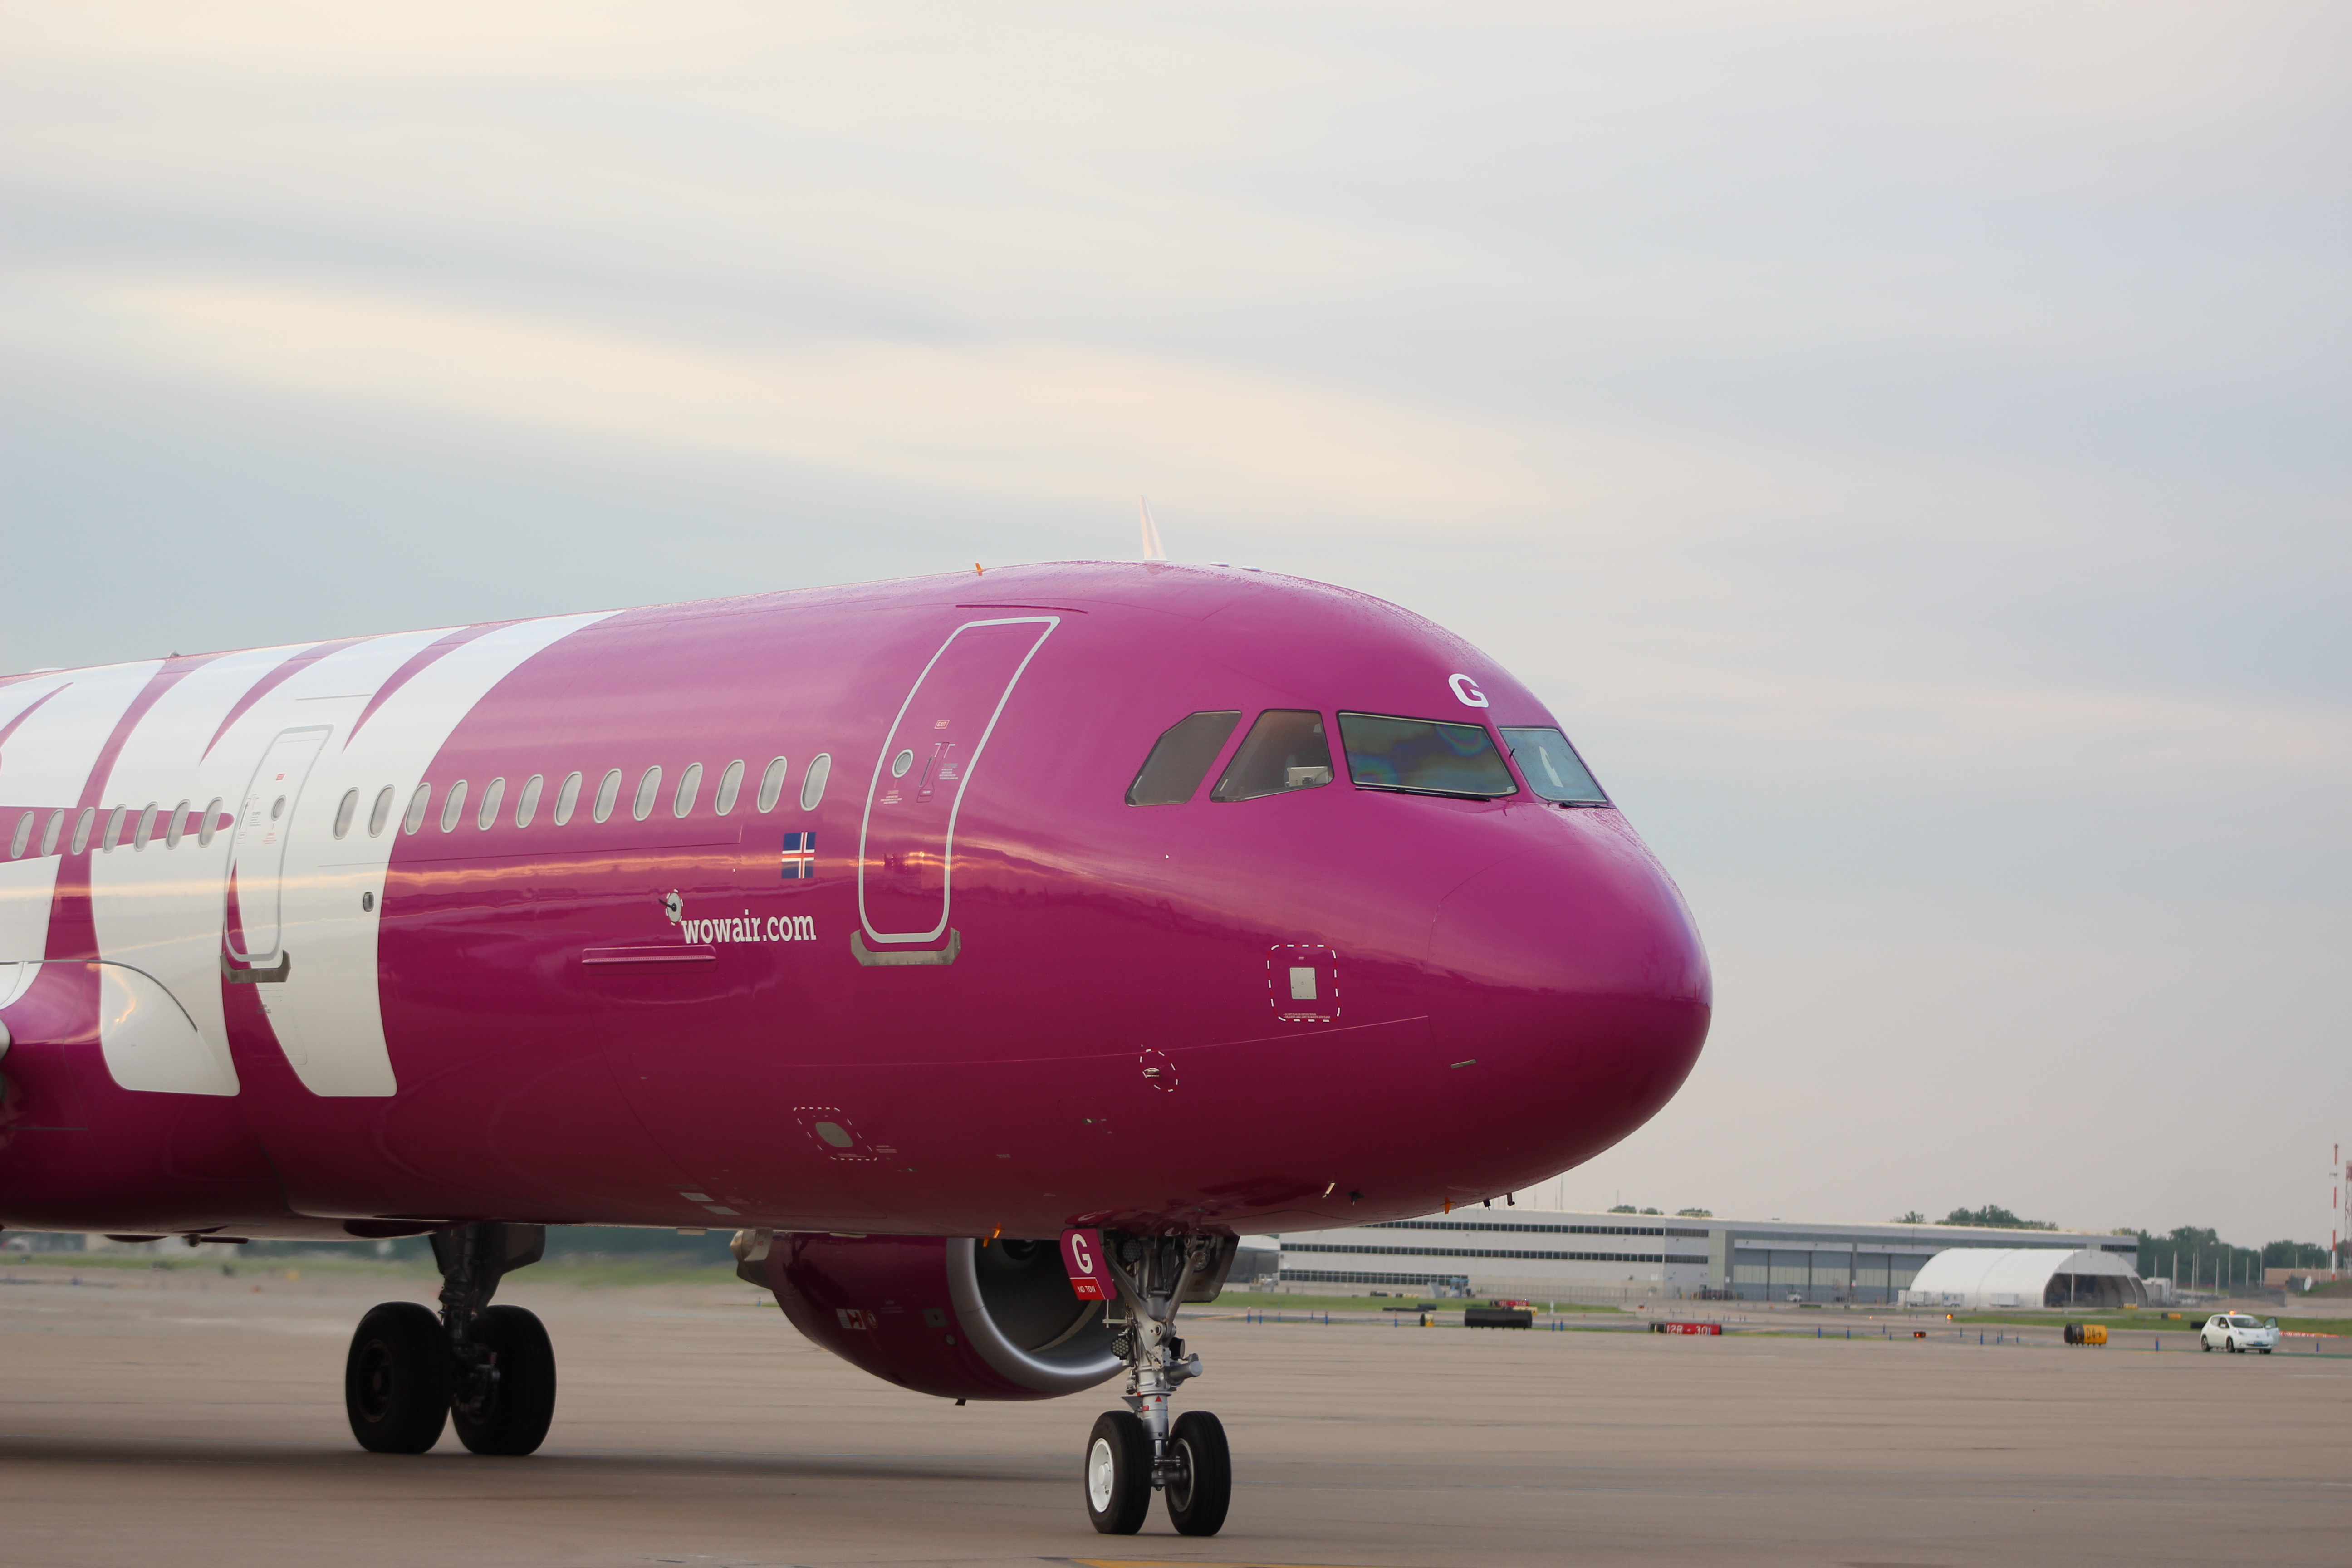 WOWAir Airbus a321-200 TF-DOG, The Aircraft for WW167 and WW168